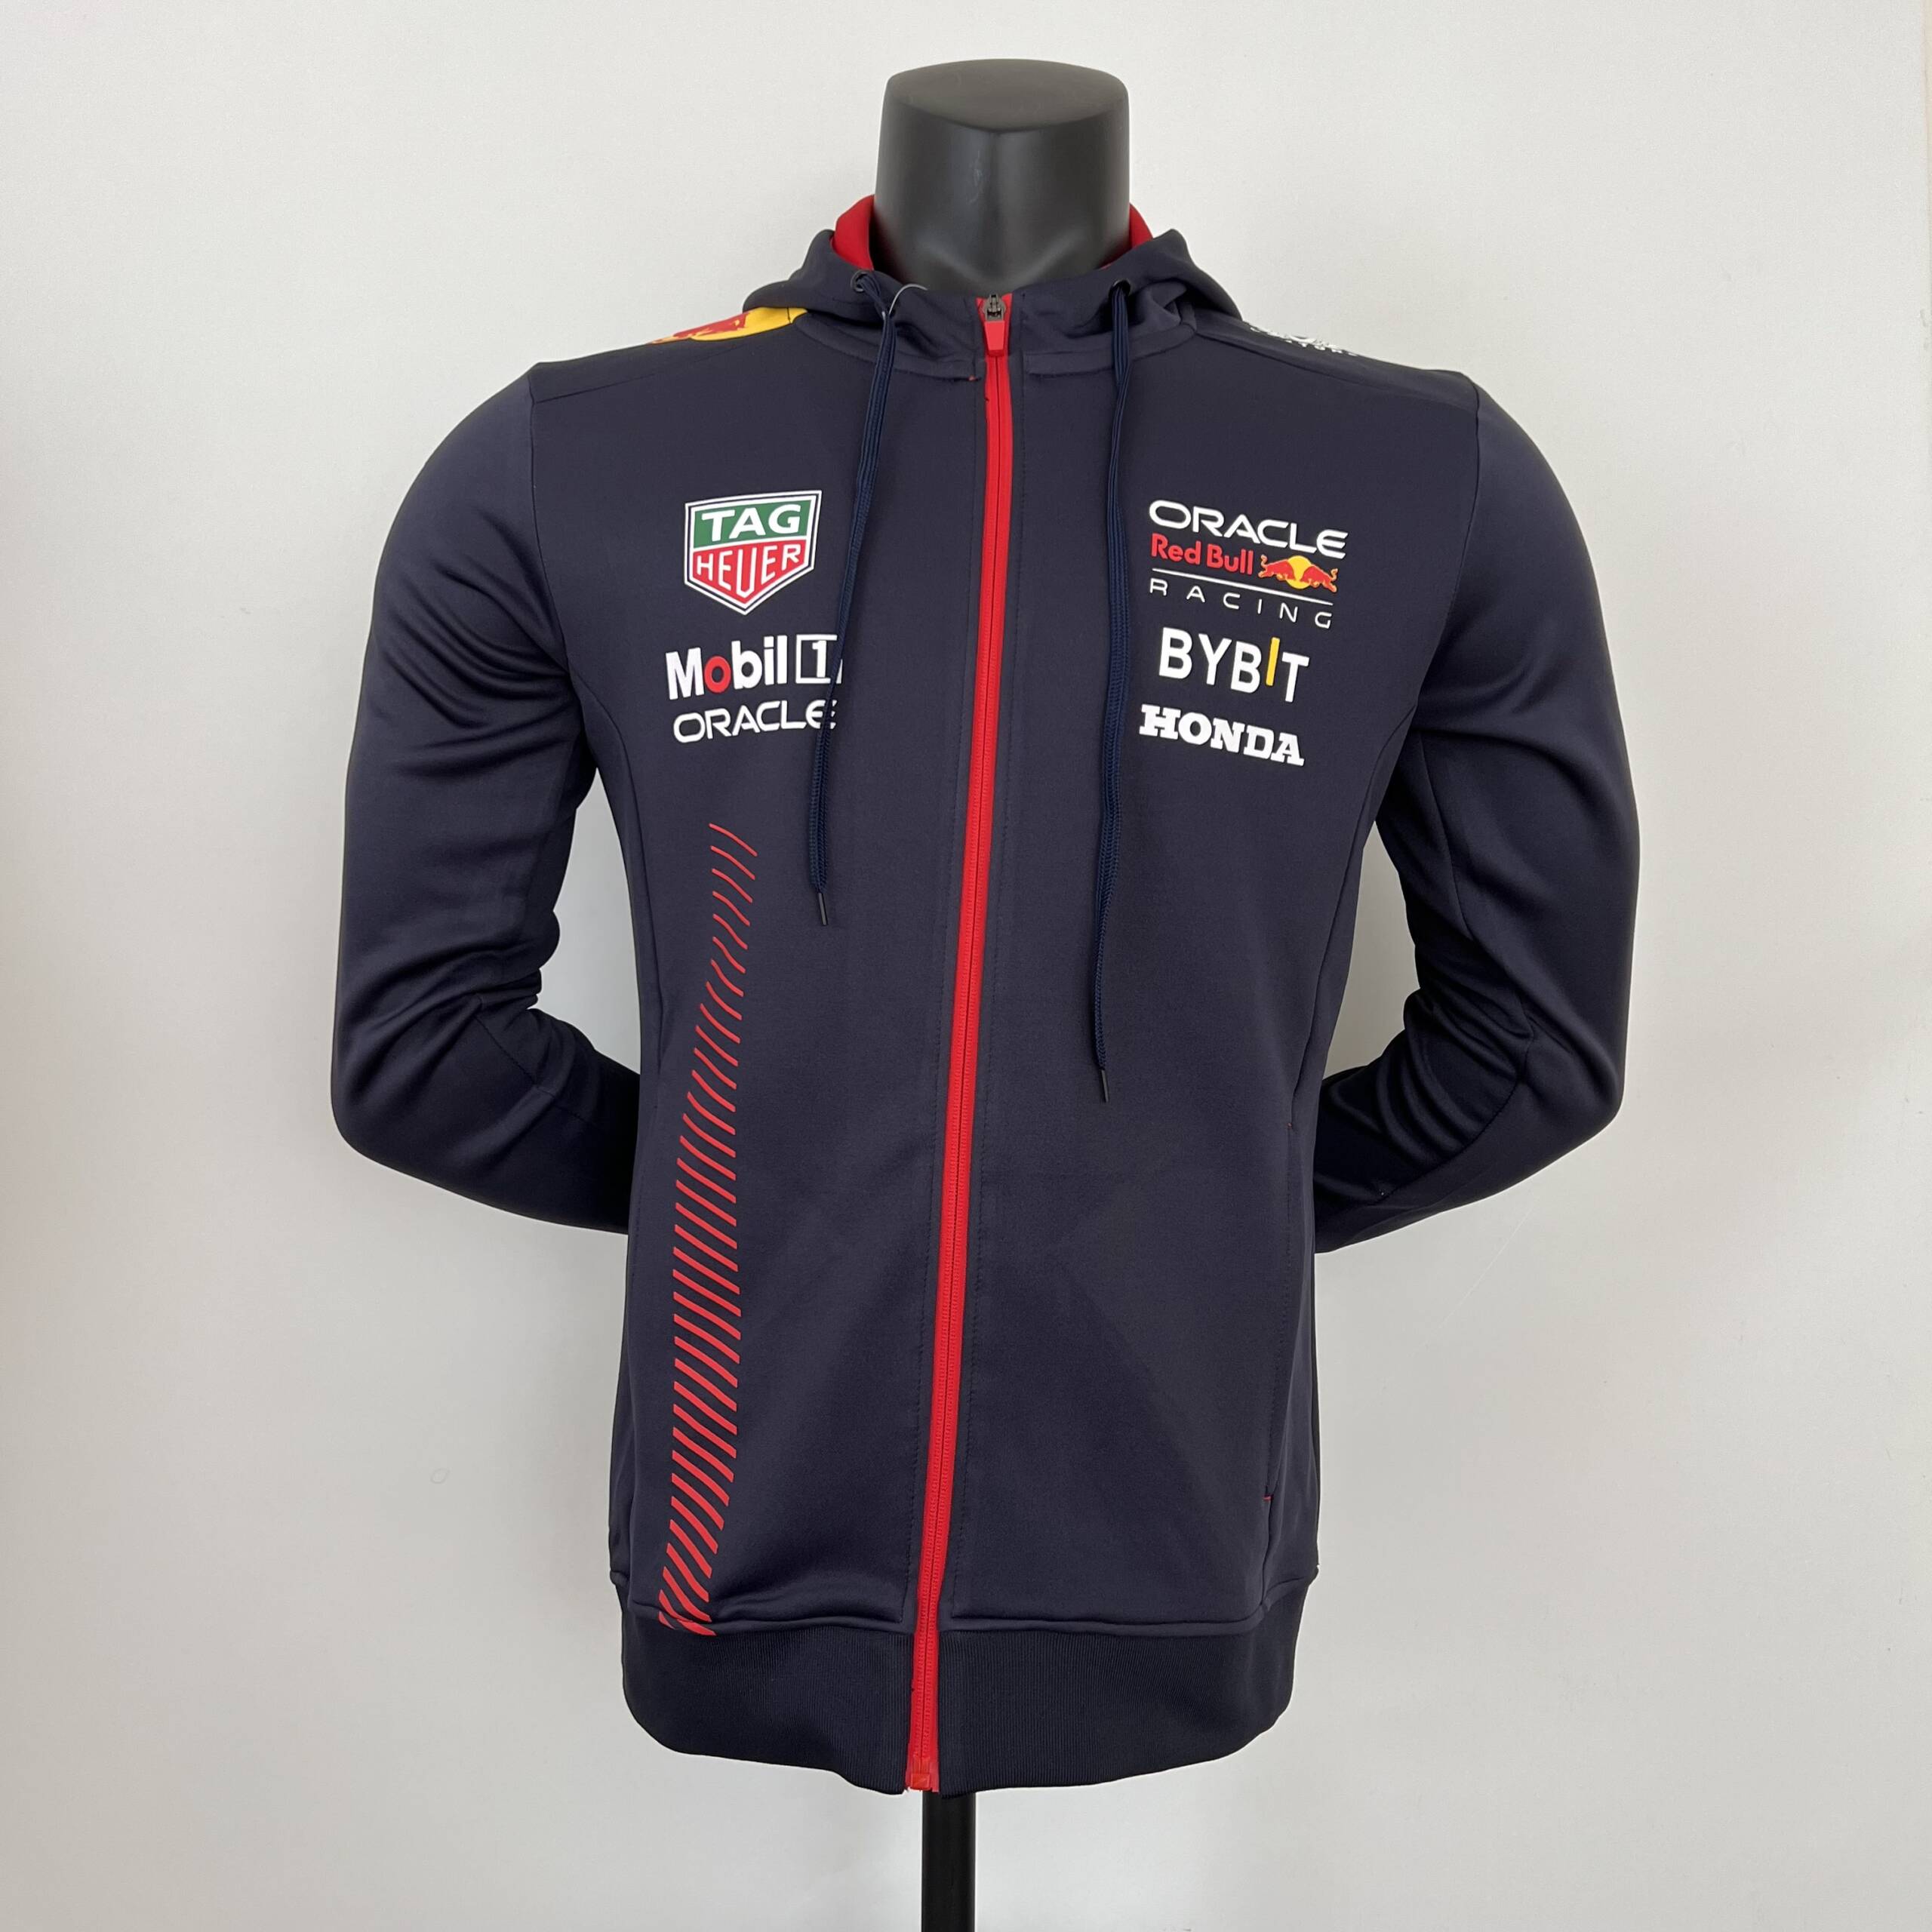 Checo Perez Collection in Oracle Red Bull Racing - Official Red Bull Online  Shop